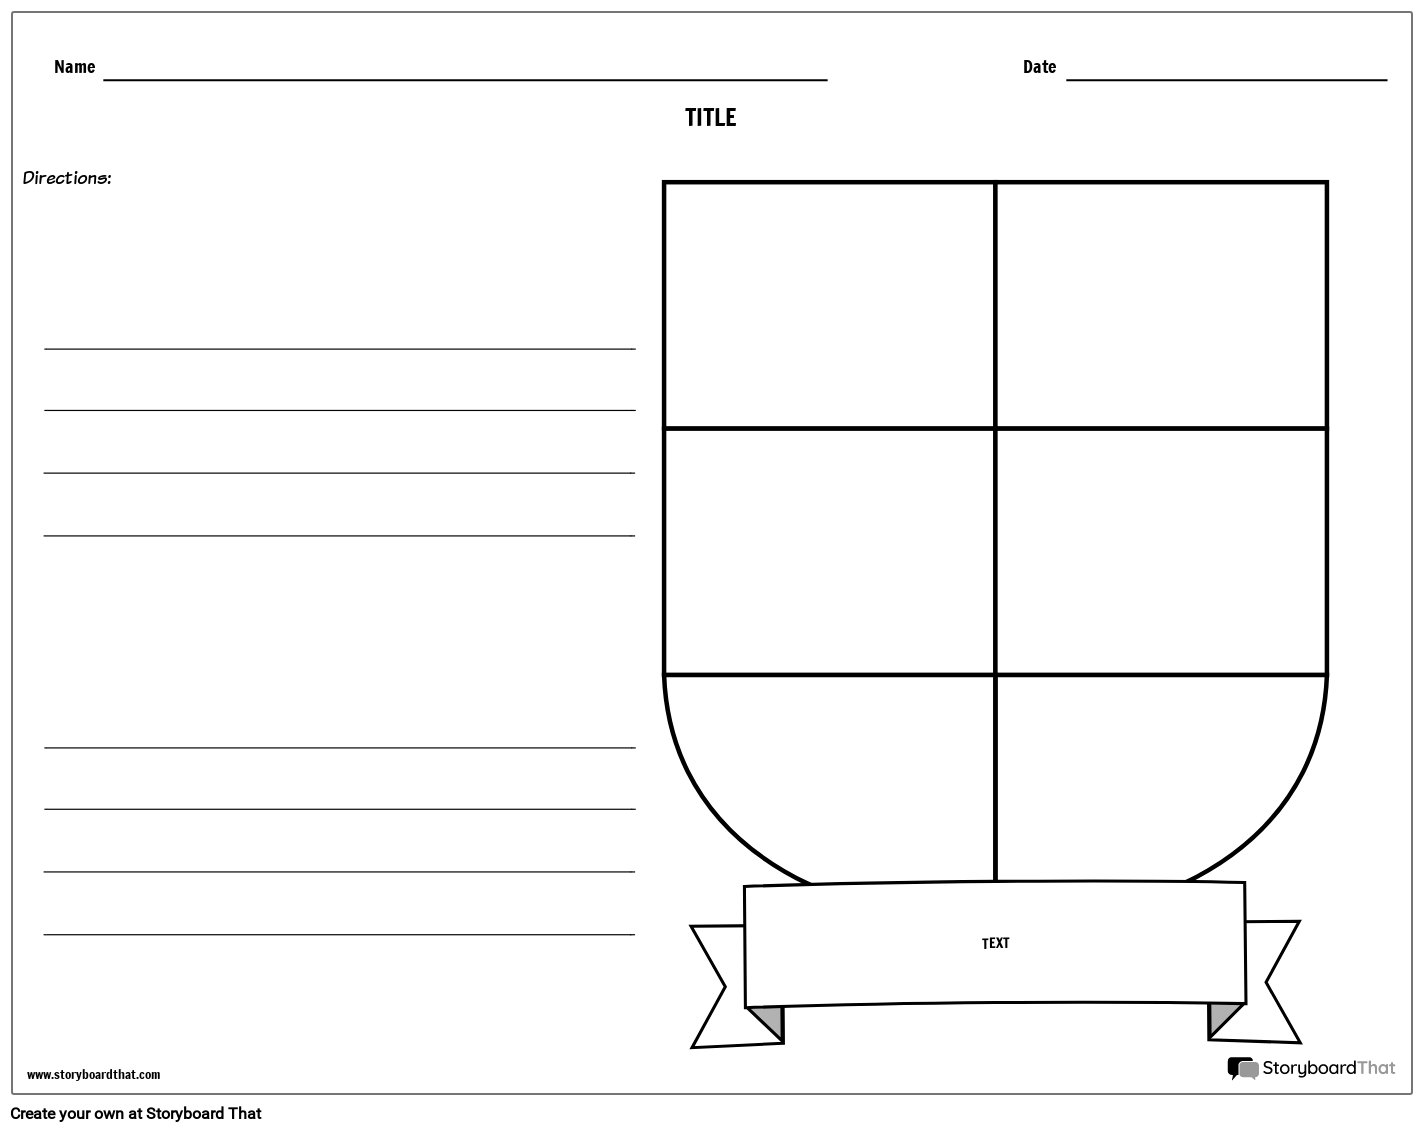 Coat of Arms - Blank Storyboard by worksheet-templates